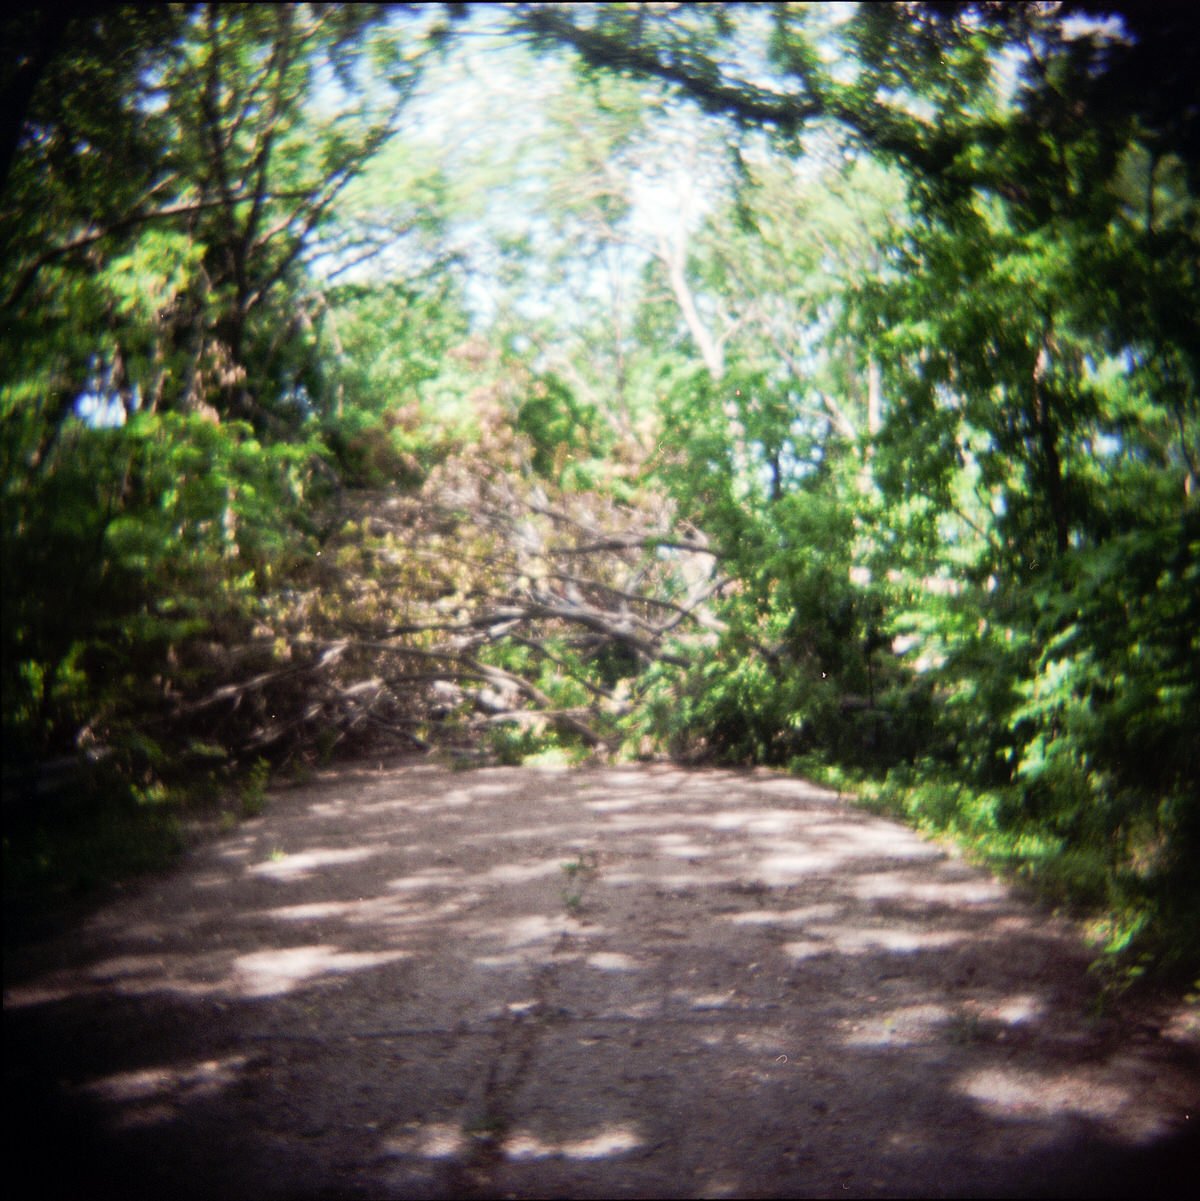 This path is now blocked by a huge fallen tree. The next 3 photos are 3 cameras and perspectives on this area.